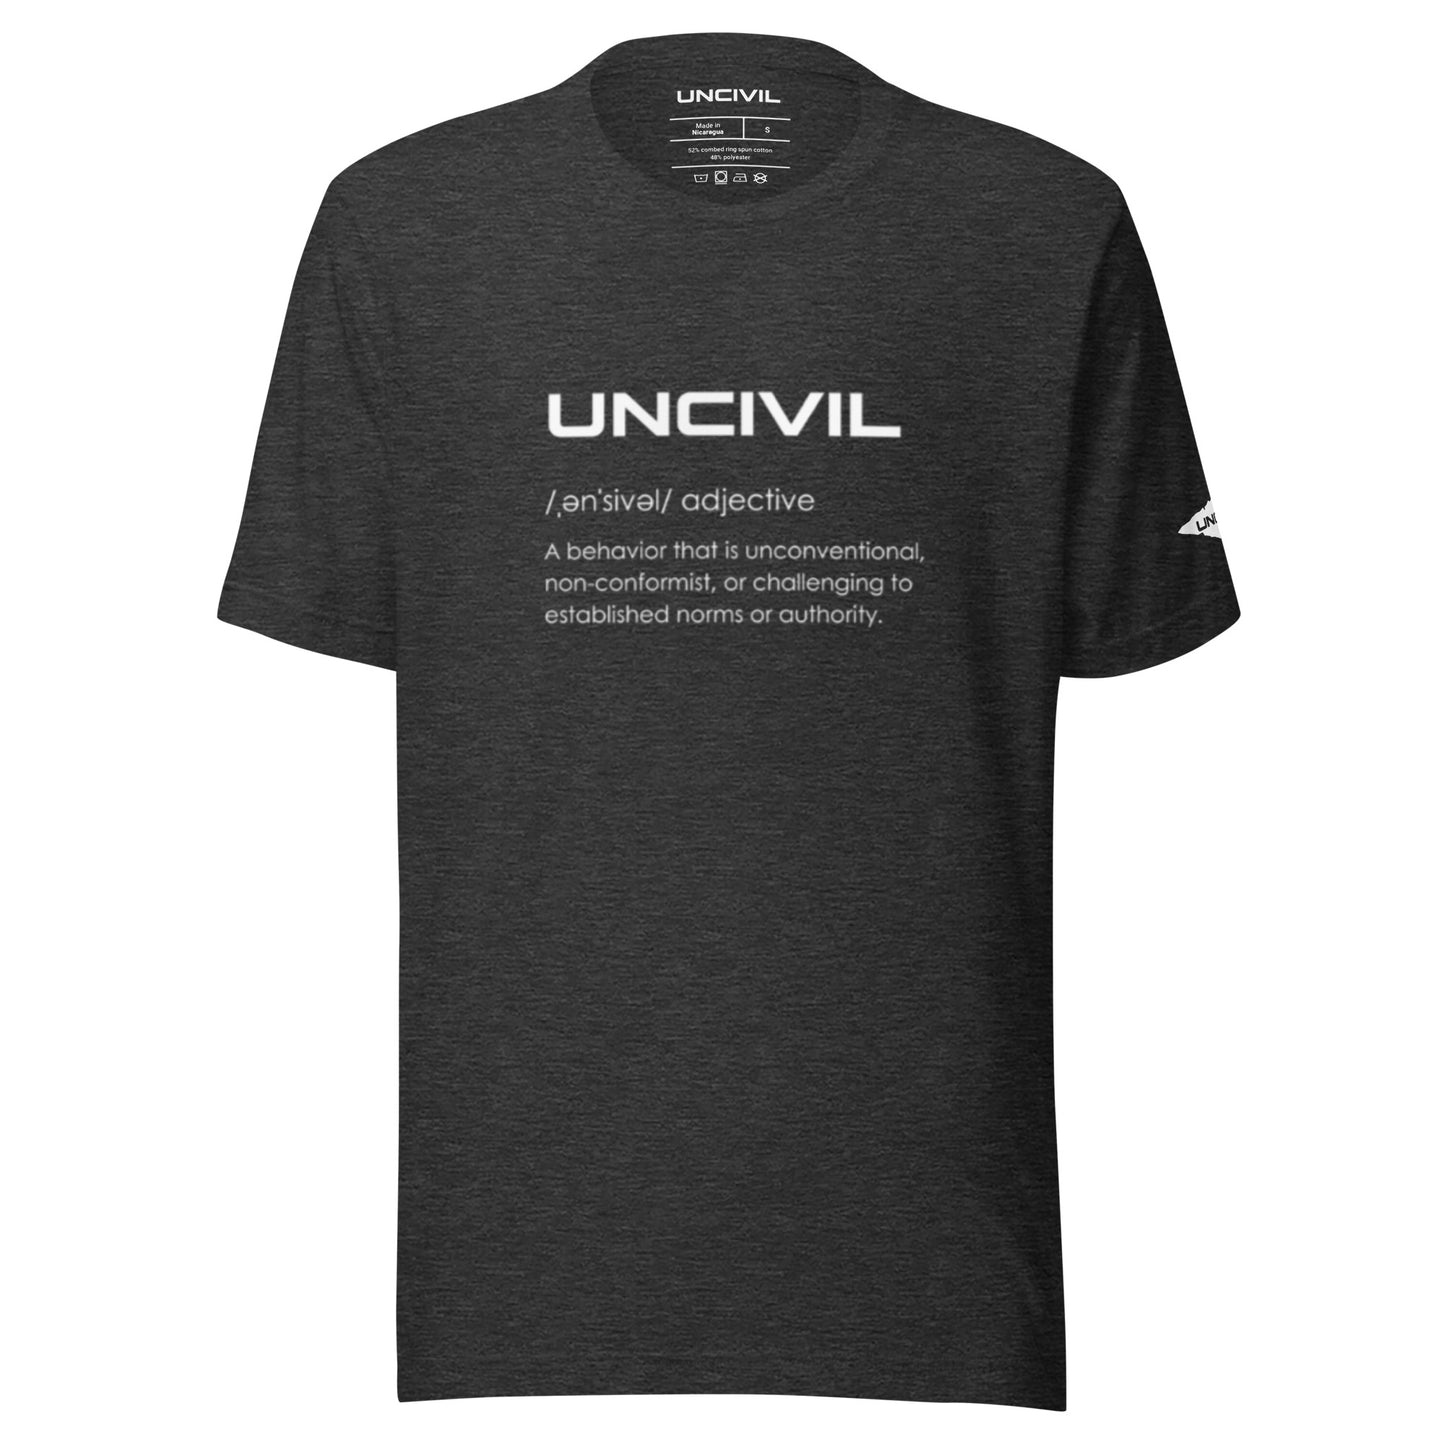 Our UNCIVIL Tee, it's what we stand for. UNCIVIL is a behavior that in unconventional, non-conformist, or challenging to established norms or authority. Dark Grey  shirt.